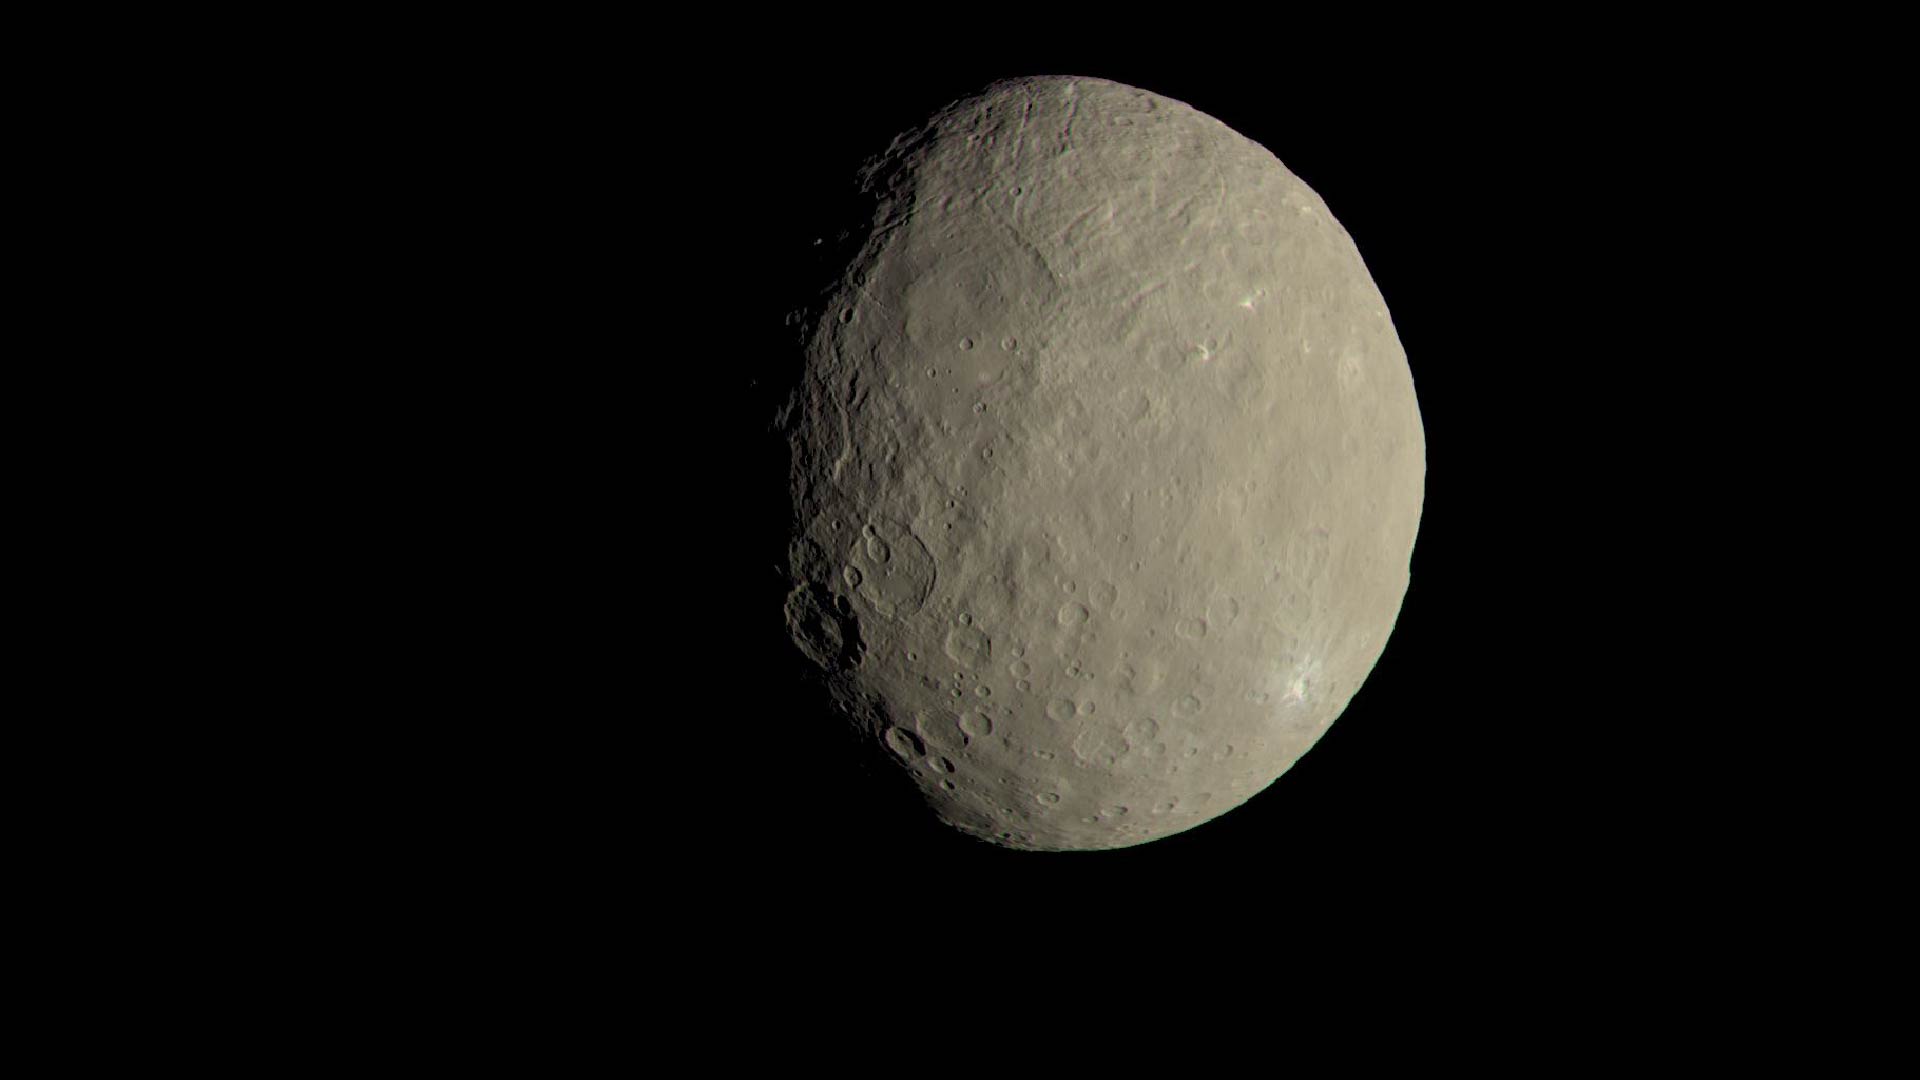 An image of Ceres. It is a grayish, cream colored planet with some craters.